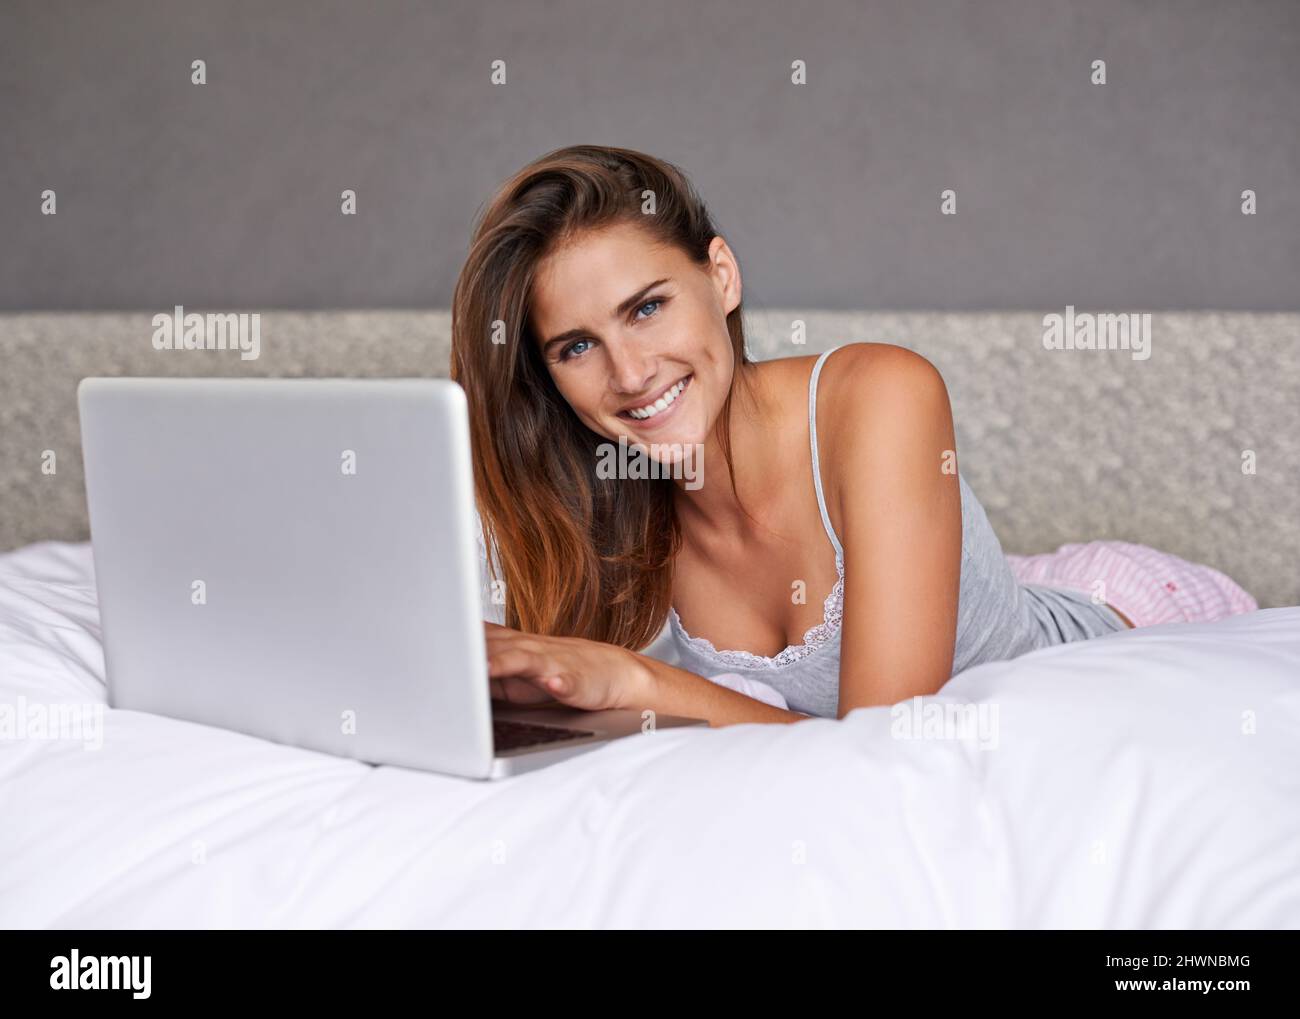 Blogging. Shot of an attractive young woman using her laptop while lying on the bed. Stock Photo